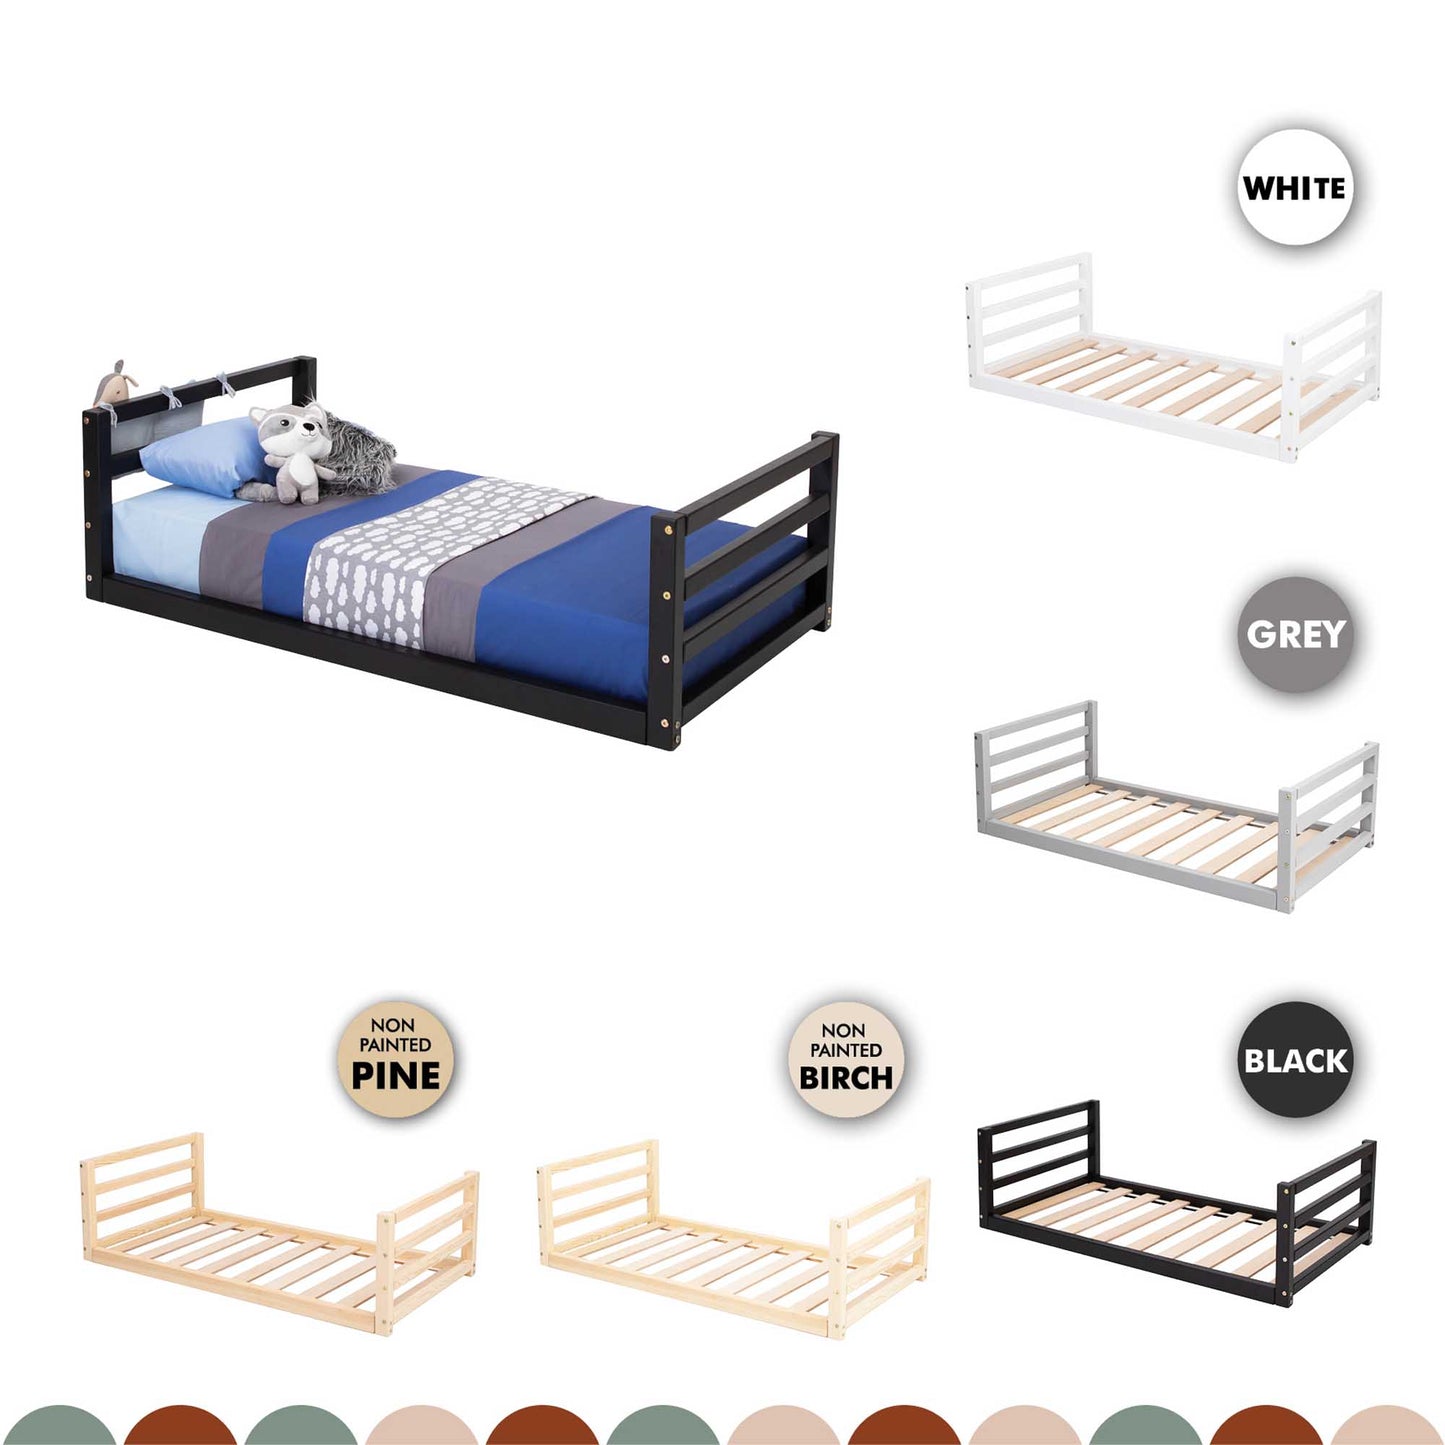 A Sweet Home From Wood toddler floor bed with a horizontal rail headboard and footboard available in different colors and styles.